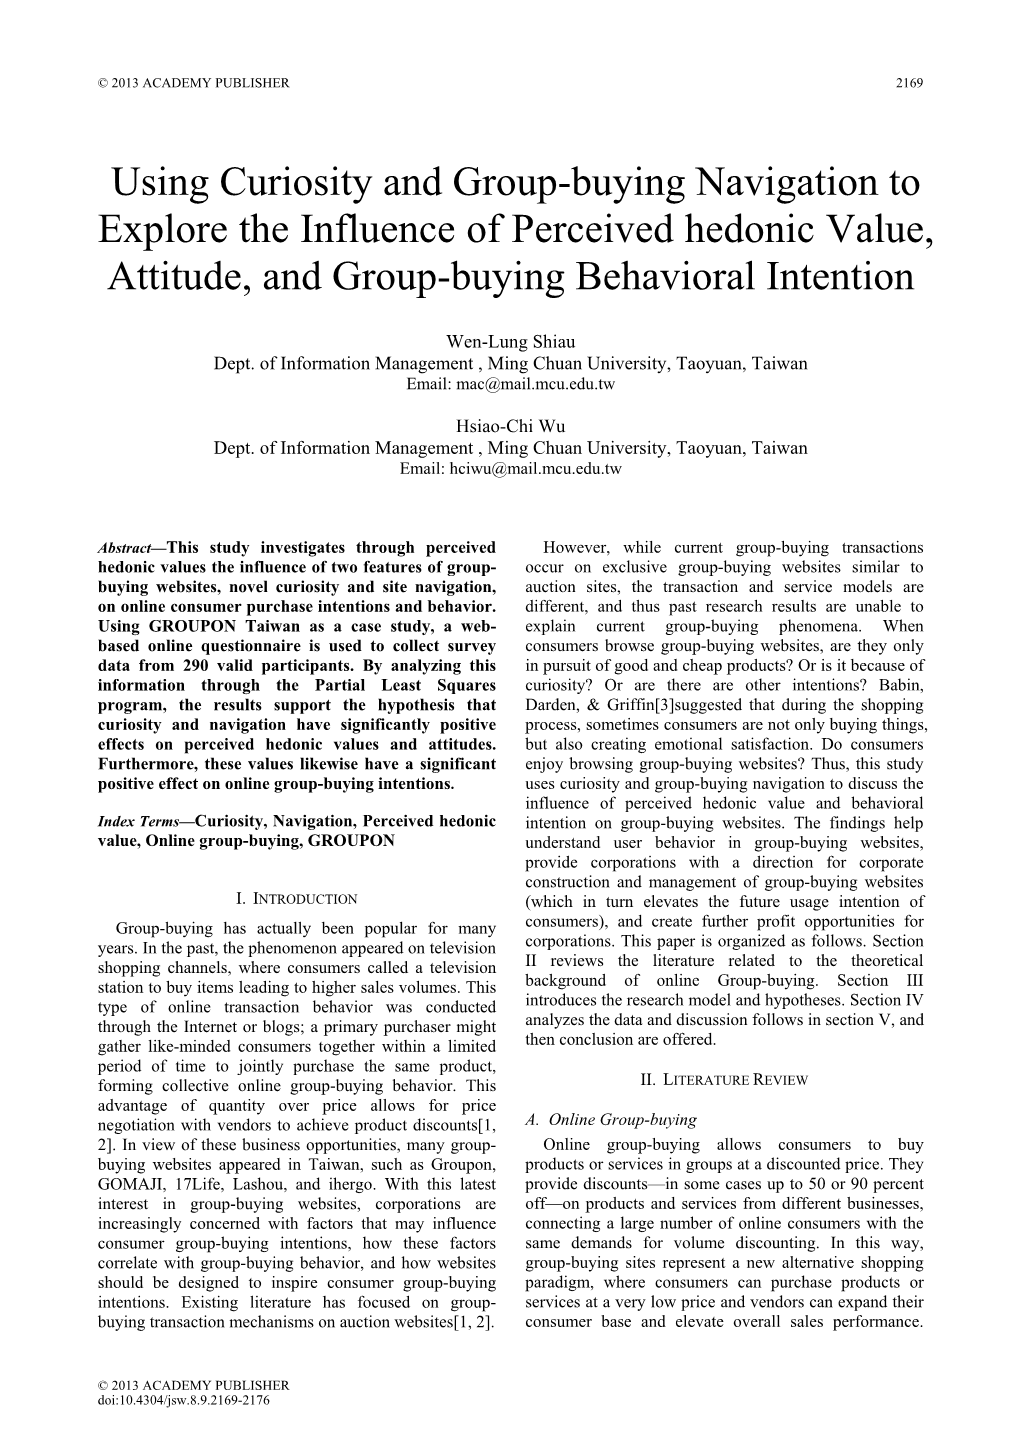 Using Curiosity and Group-Buying Navigation to Explore the Influence of Perceived Hedonic Value, Attitude, and Group-Buying Behavioral Intention